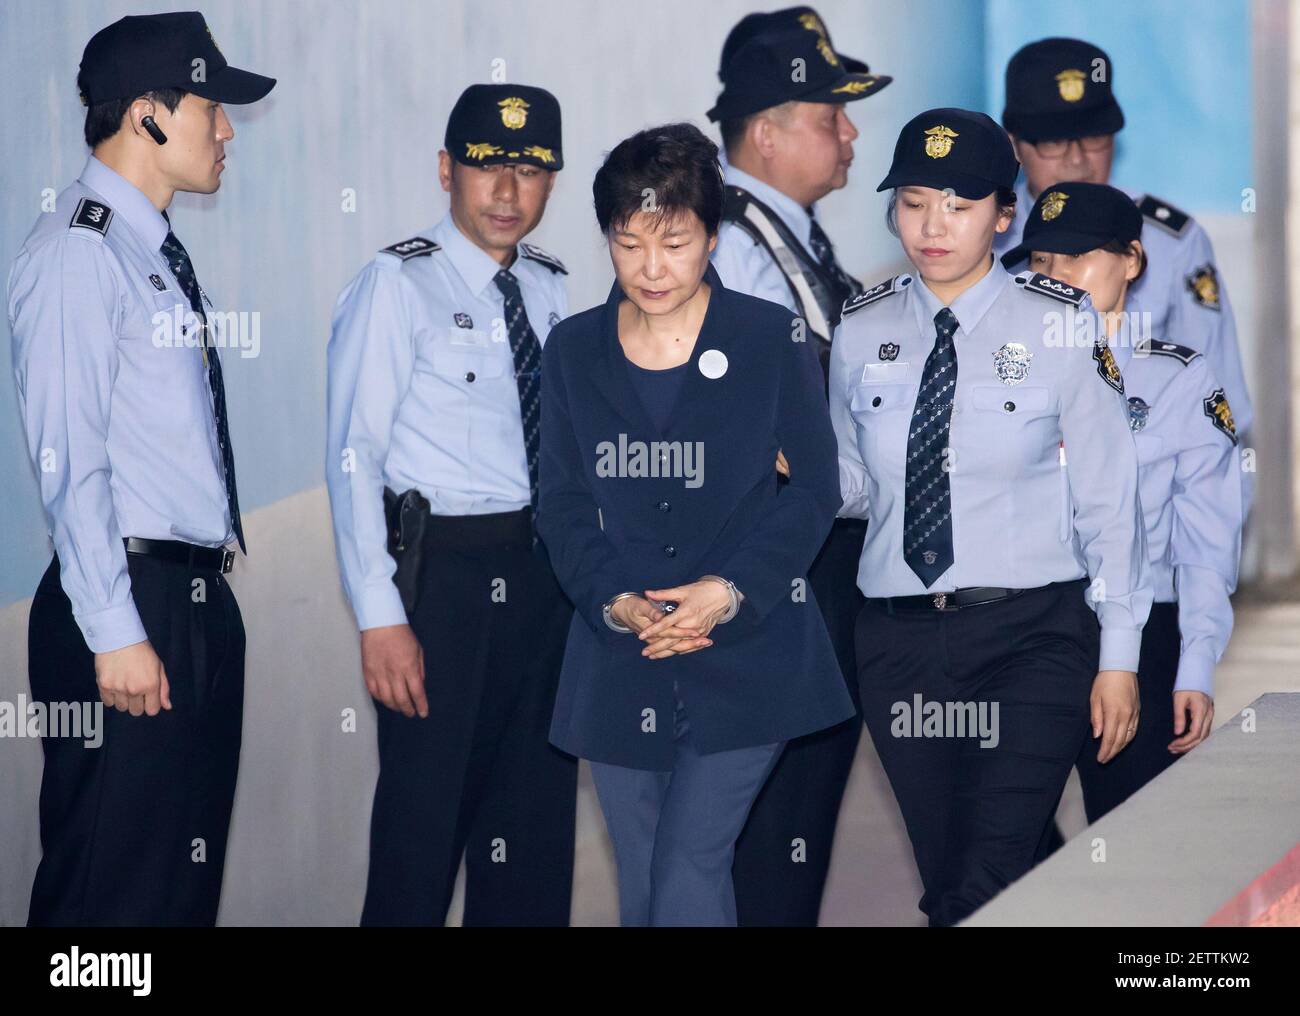 23 May 2017 - Seoul, South Korea : South Korean Park Geun-hye, former South Korea’s president, (center), is escorted by prison officers as she arrives at the Seoul Central District Court in Seoul, South Korea, on May 23, 2017. Photo Credit: SeongJoon Cho/Pool *** Please Use Credit from Credit Field *** Stock Photo